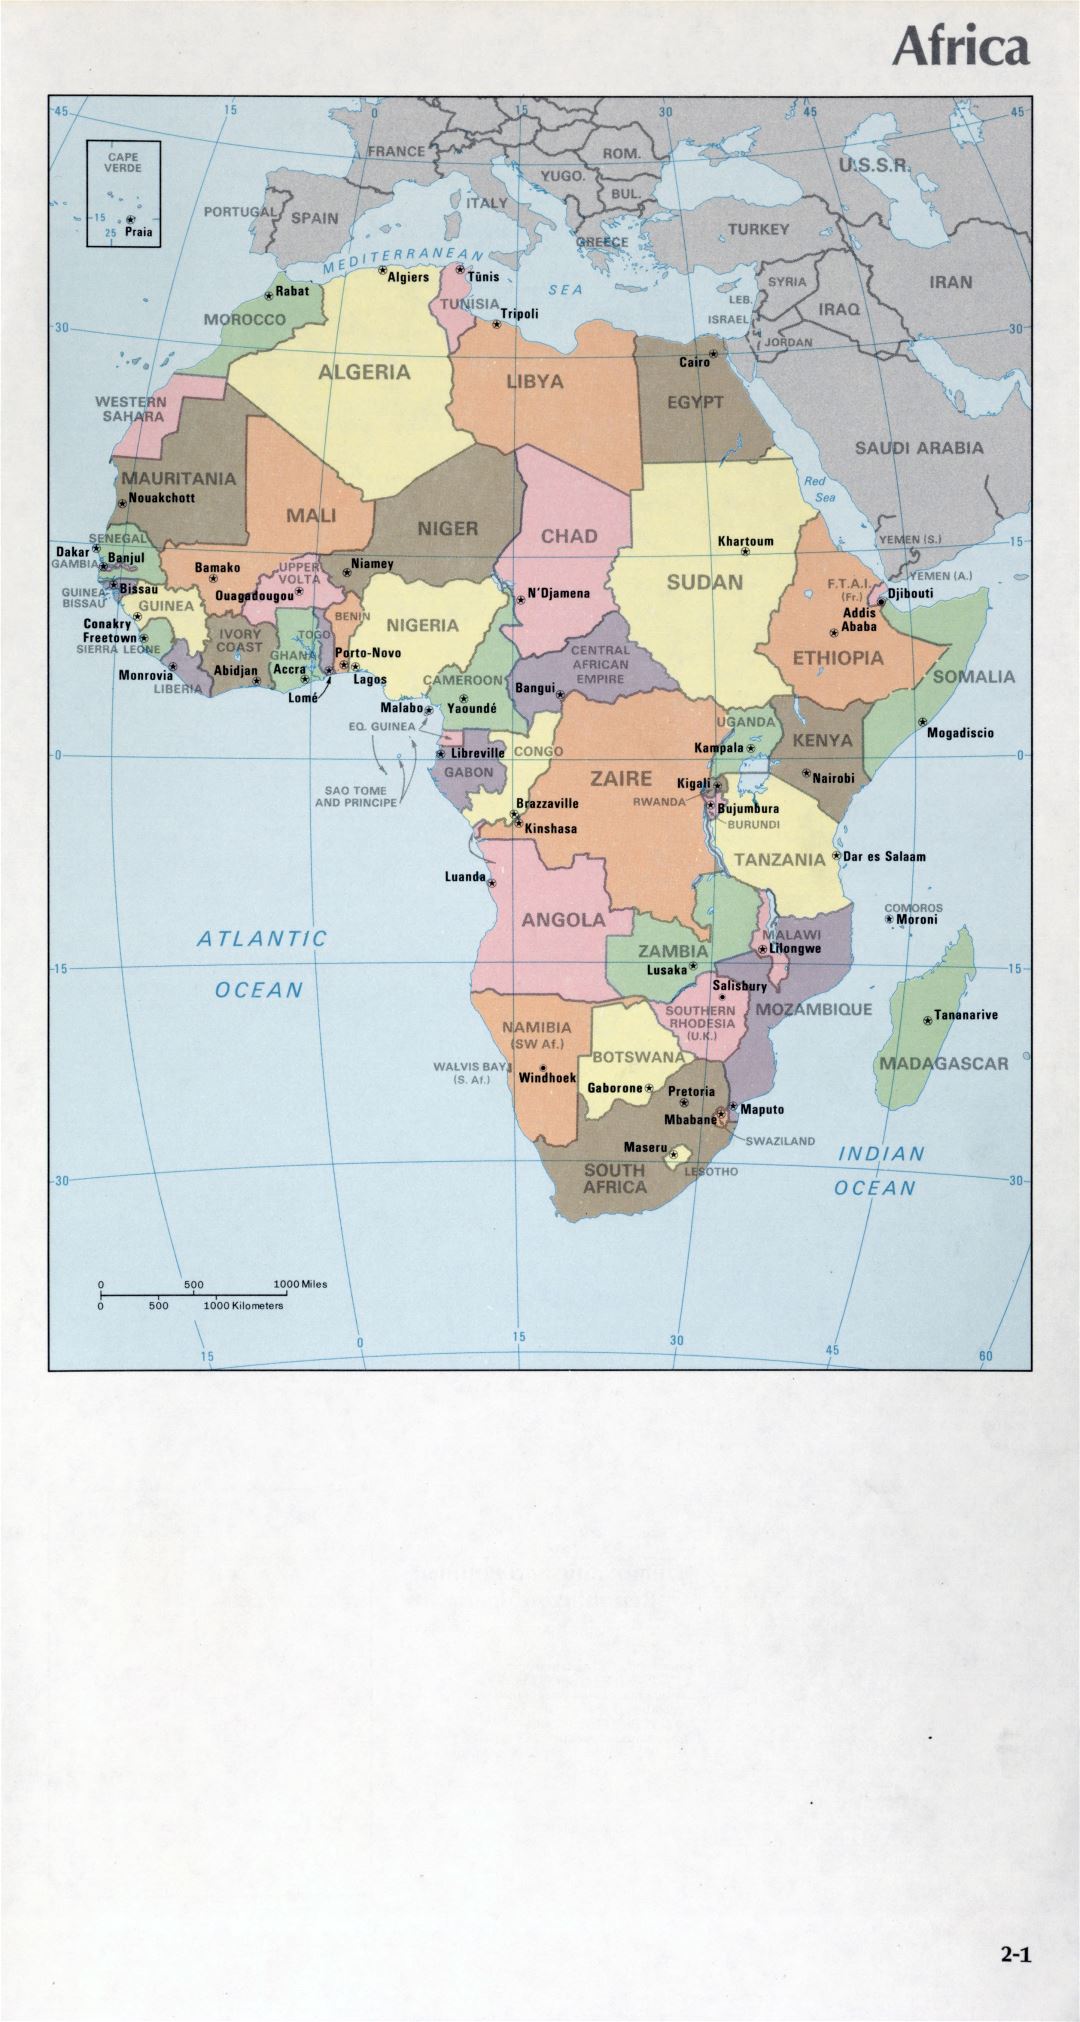 Map of Africa (2-1)